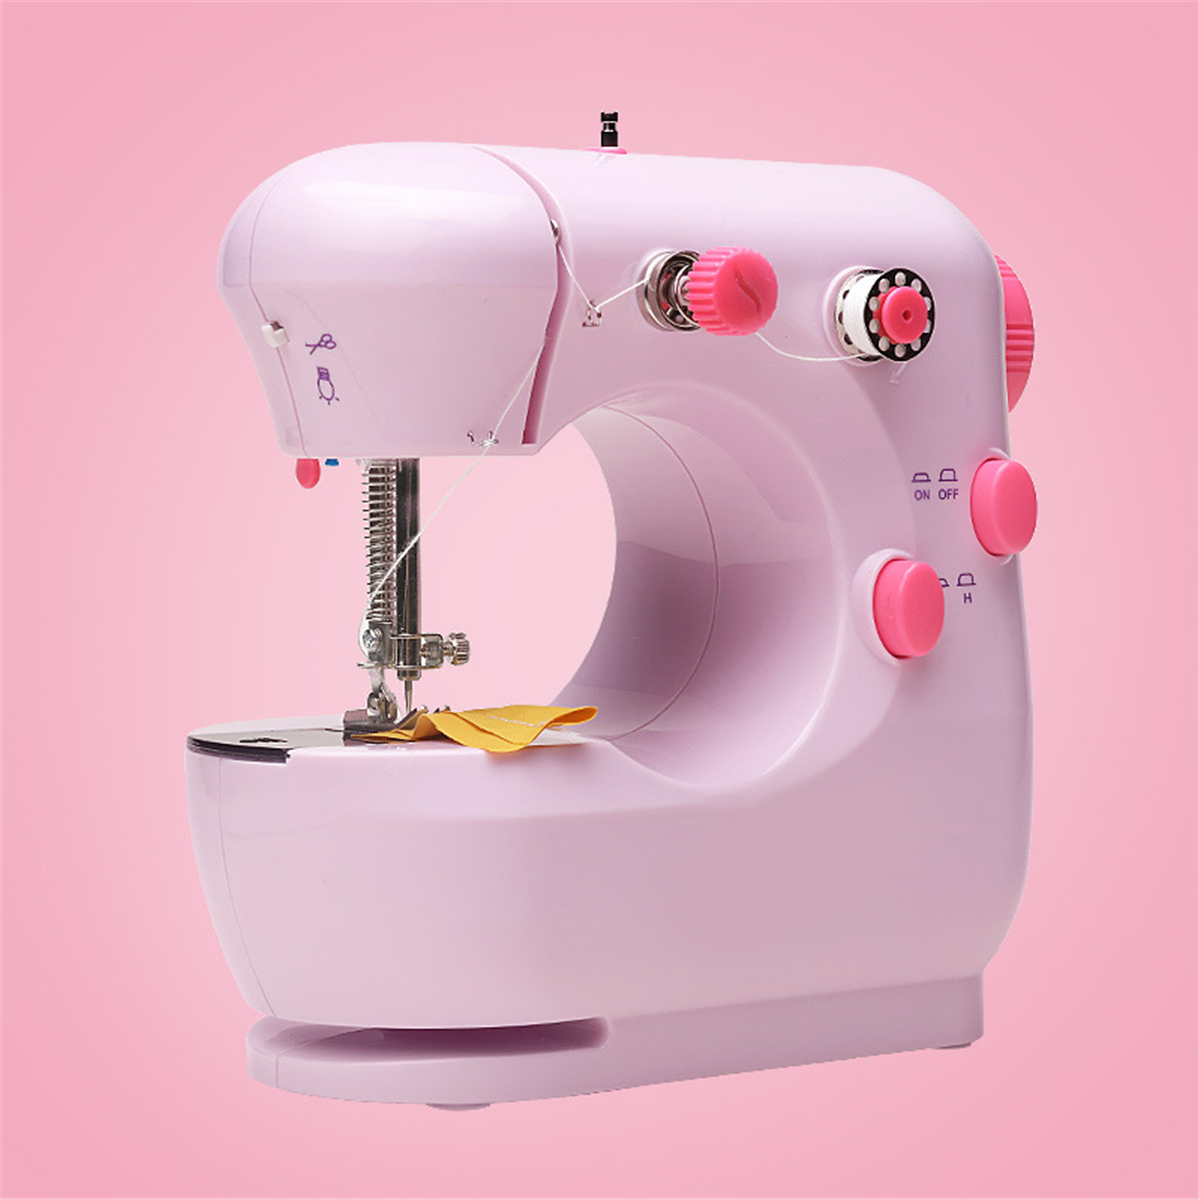 Mini-Portable-Electric-Desktop-Sewing-Machine-2-Speeds-For-DIY-Stitch-Clothes-Fabric-1690684-9